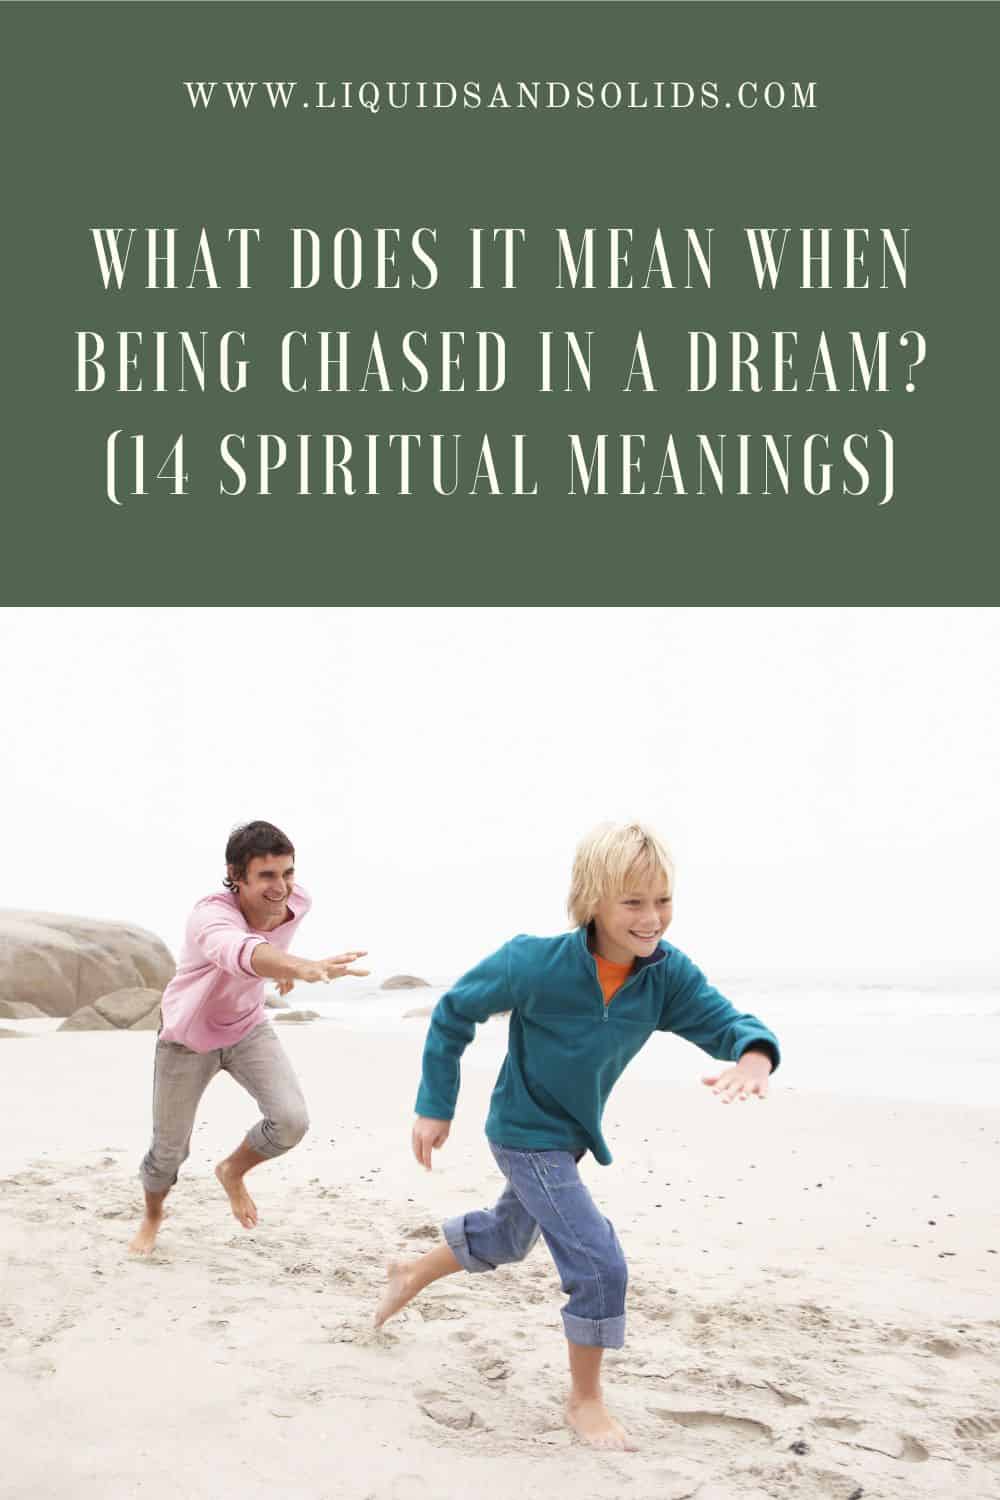 What Does it Mean to Dream About Being Chased?